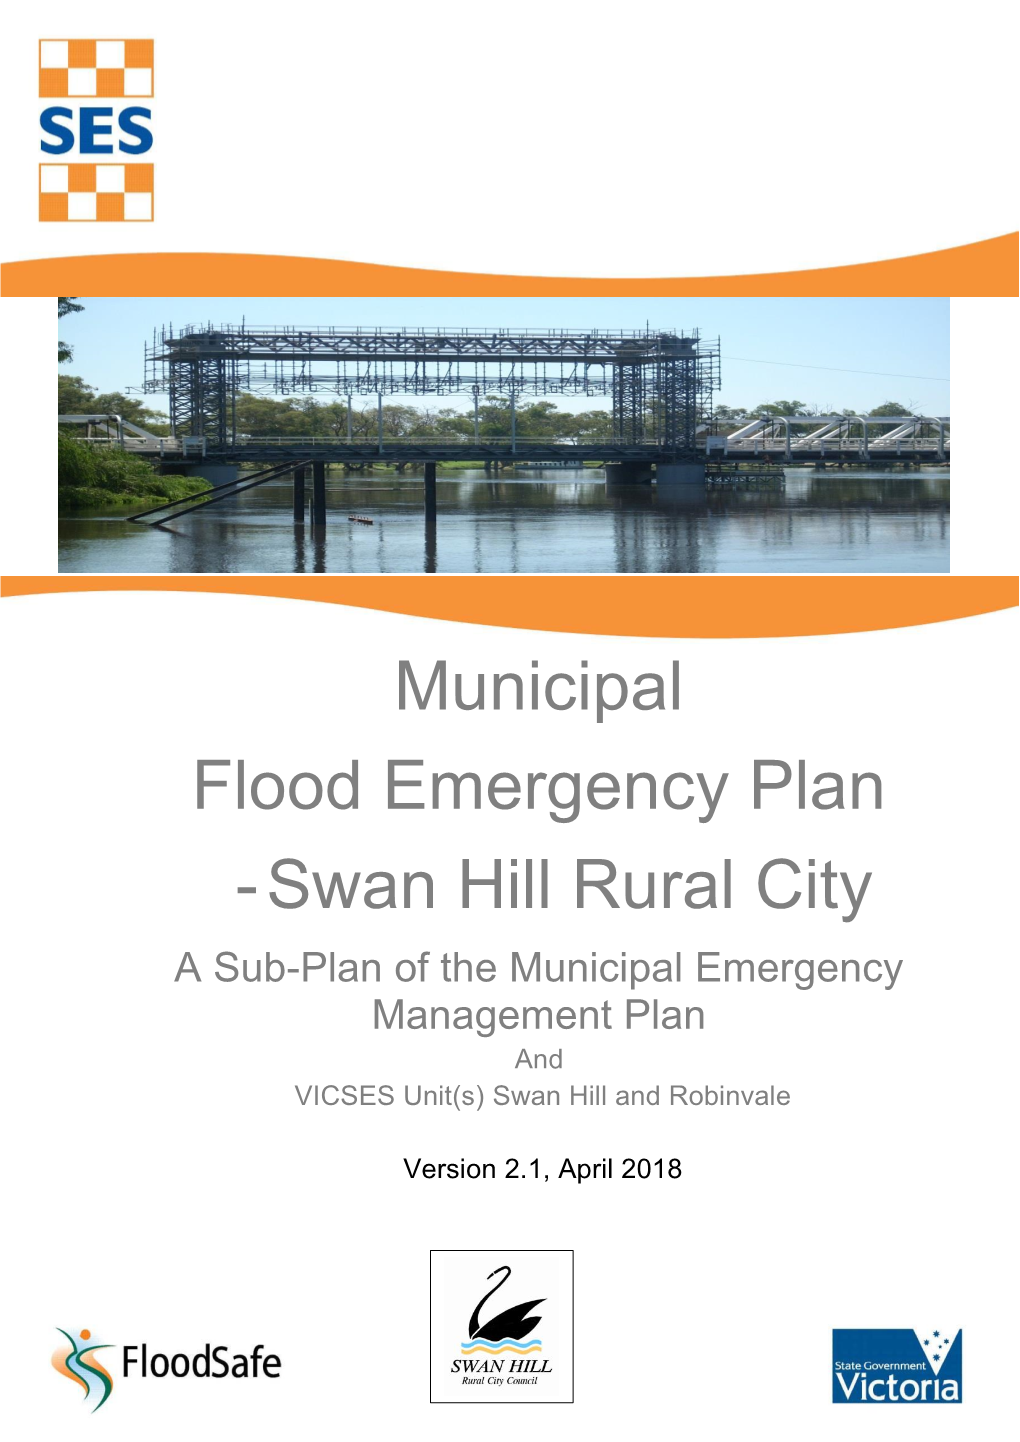 Flood Emergency Plan - Swan Hill Rural City a Sub-Plan of the Municipal Emergency Management Plan and VICSES Unit(S) Swan Hill and Robinvale